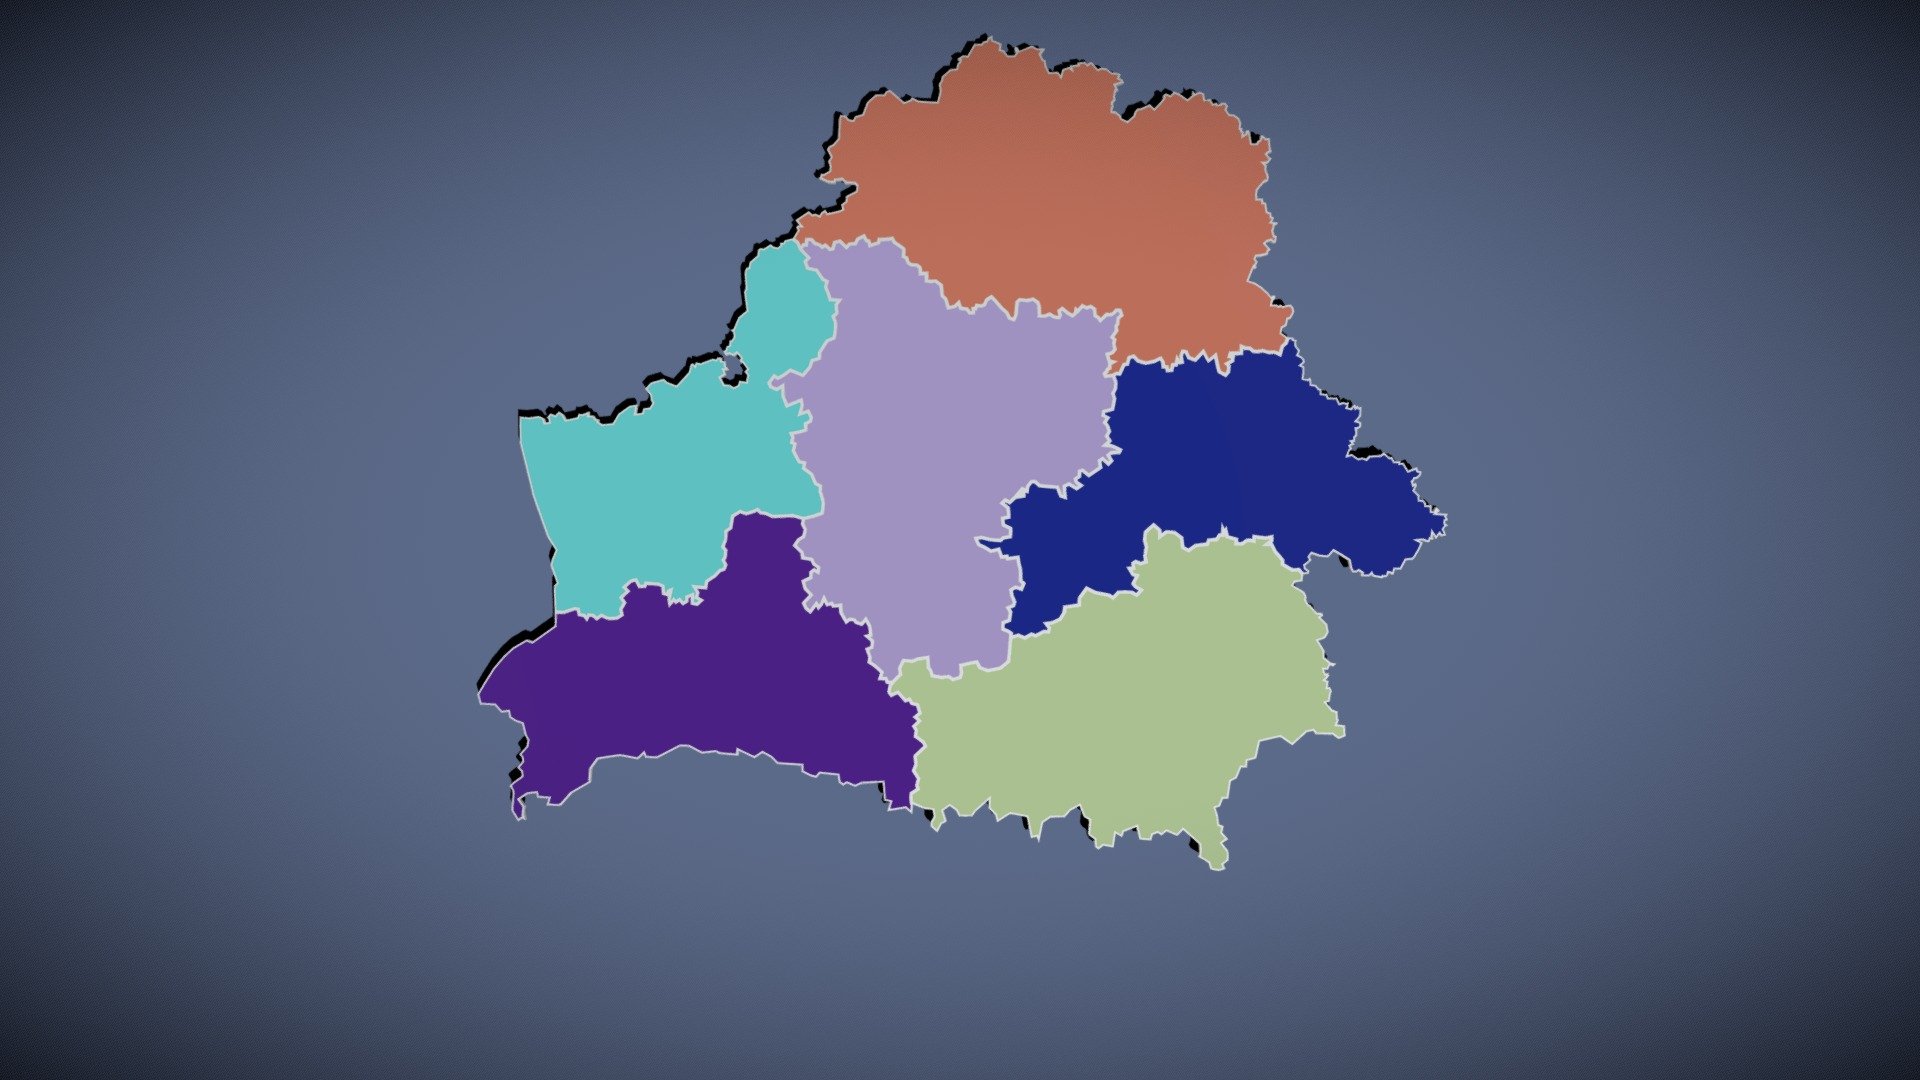 *BELARUS POLITICAL MAP LAYOUT *

Model made with Blender 2.90.

Good clean topology.

Easy to deform.

Print ready.

Materials applied as seen on renders.

Each county as separate object.

Subdivision ready.

All named correctly 3d model